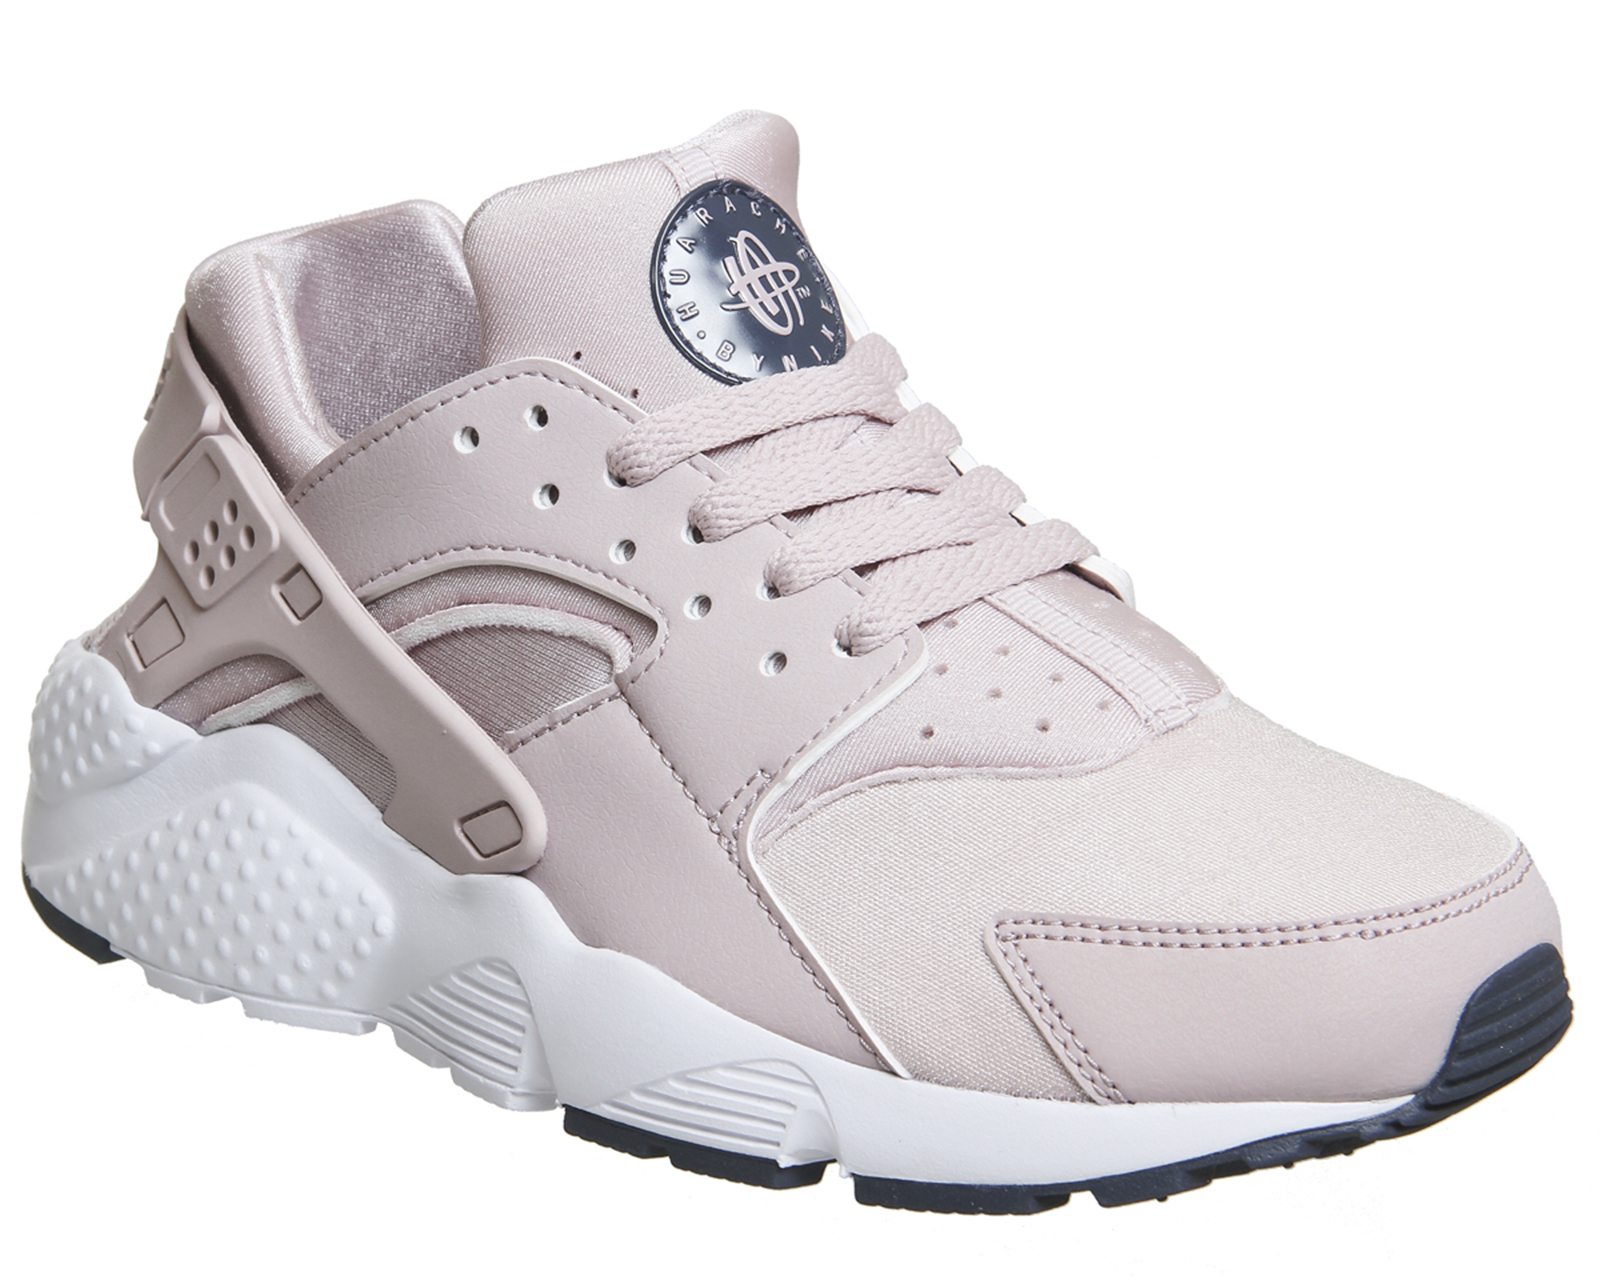 Nike Huarache Trainers Particle Rose 